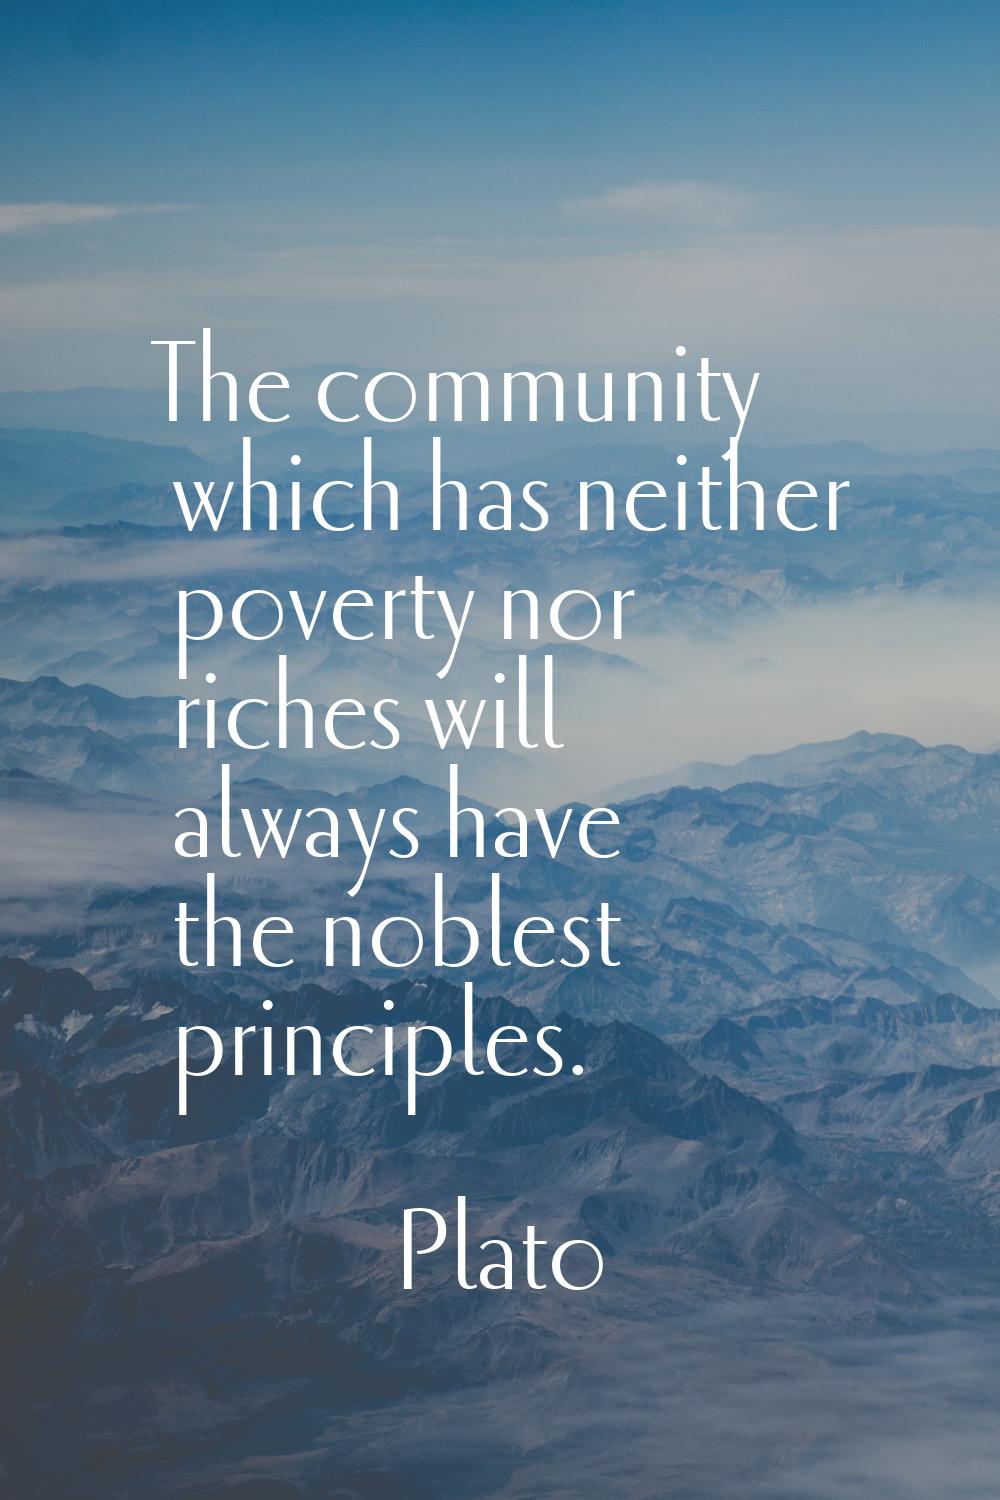 The community which has neither poverty nor riches will always have the noblest principles.